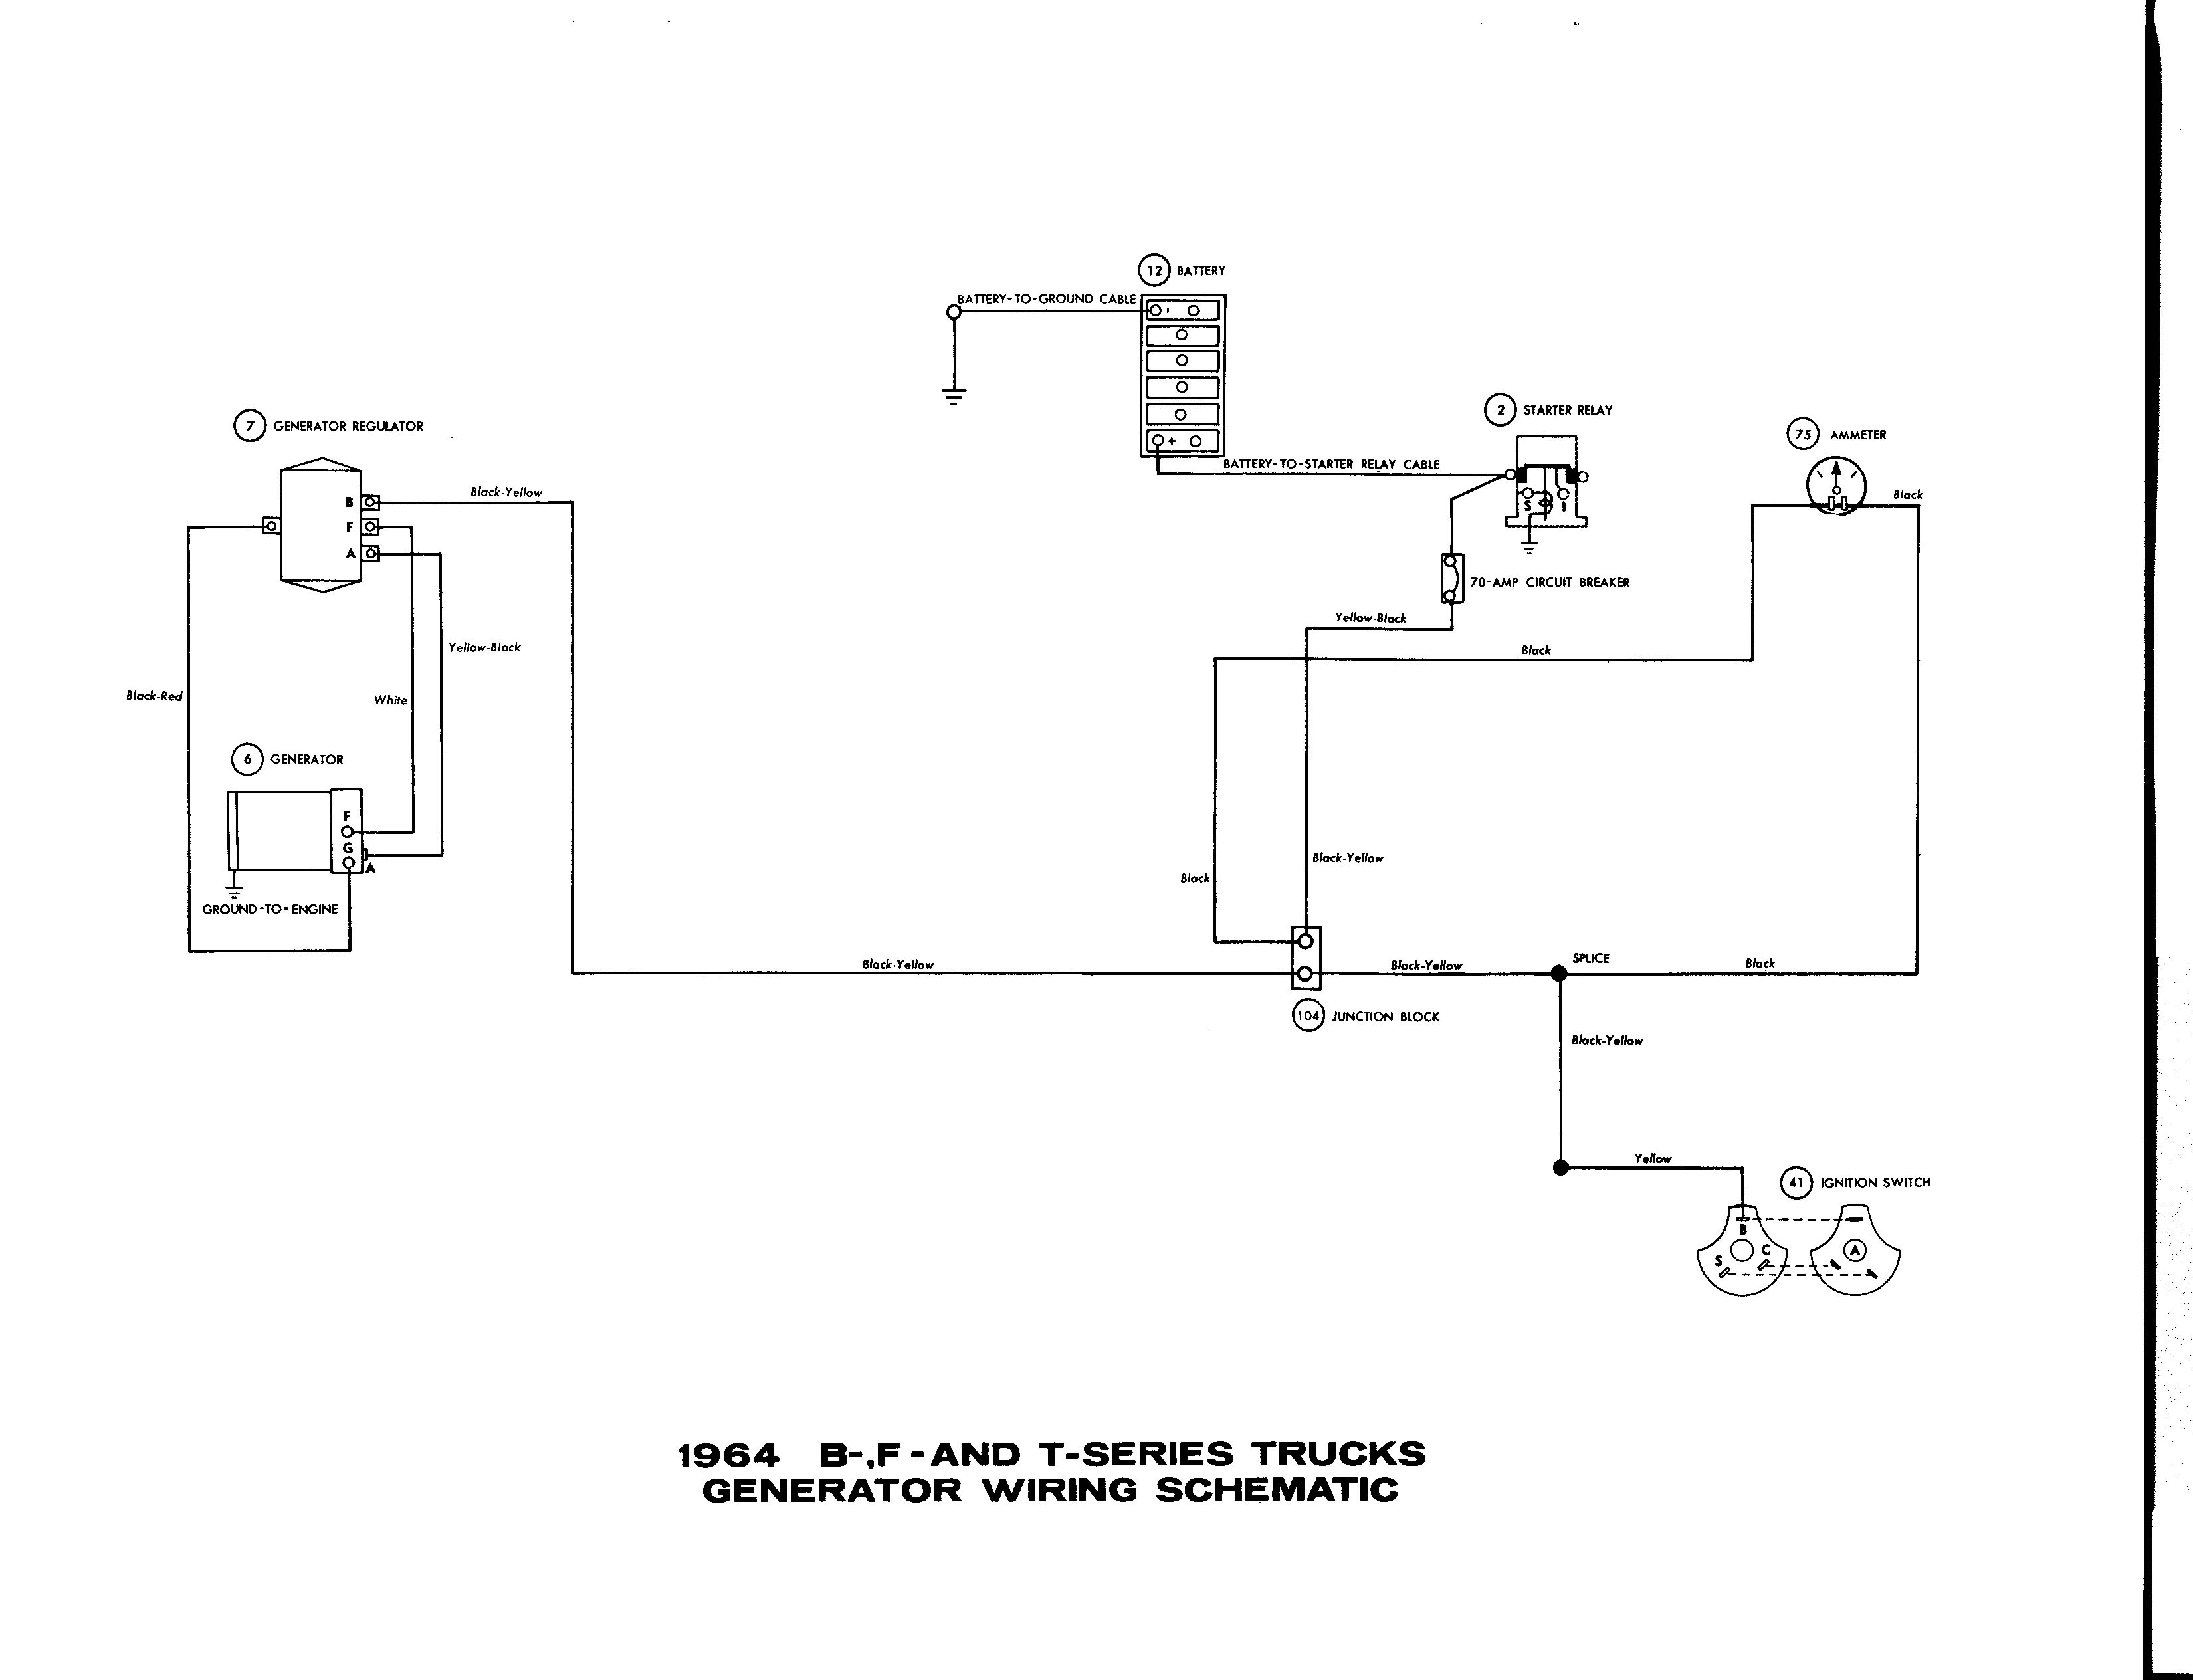 Delco 10si Alternator Wiring Diagram Amazing Chevy E Wire Alternator Diagram S Everything You Of Delco 10si Alternator Wiring Diagram